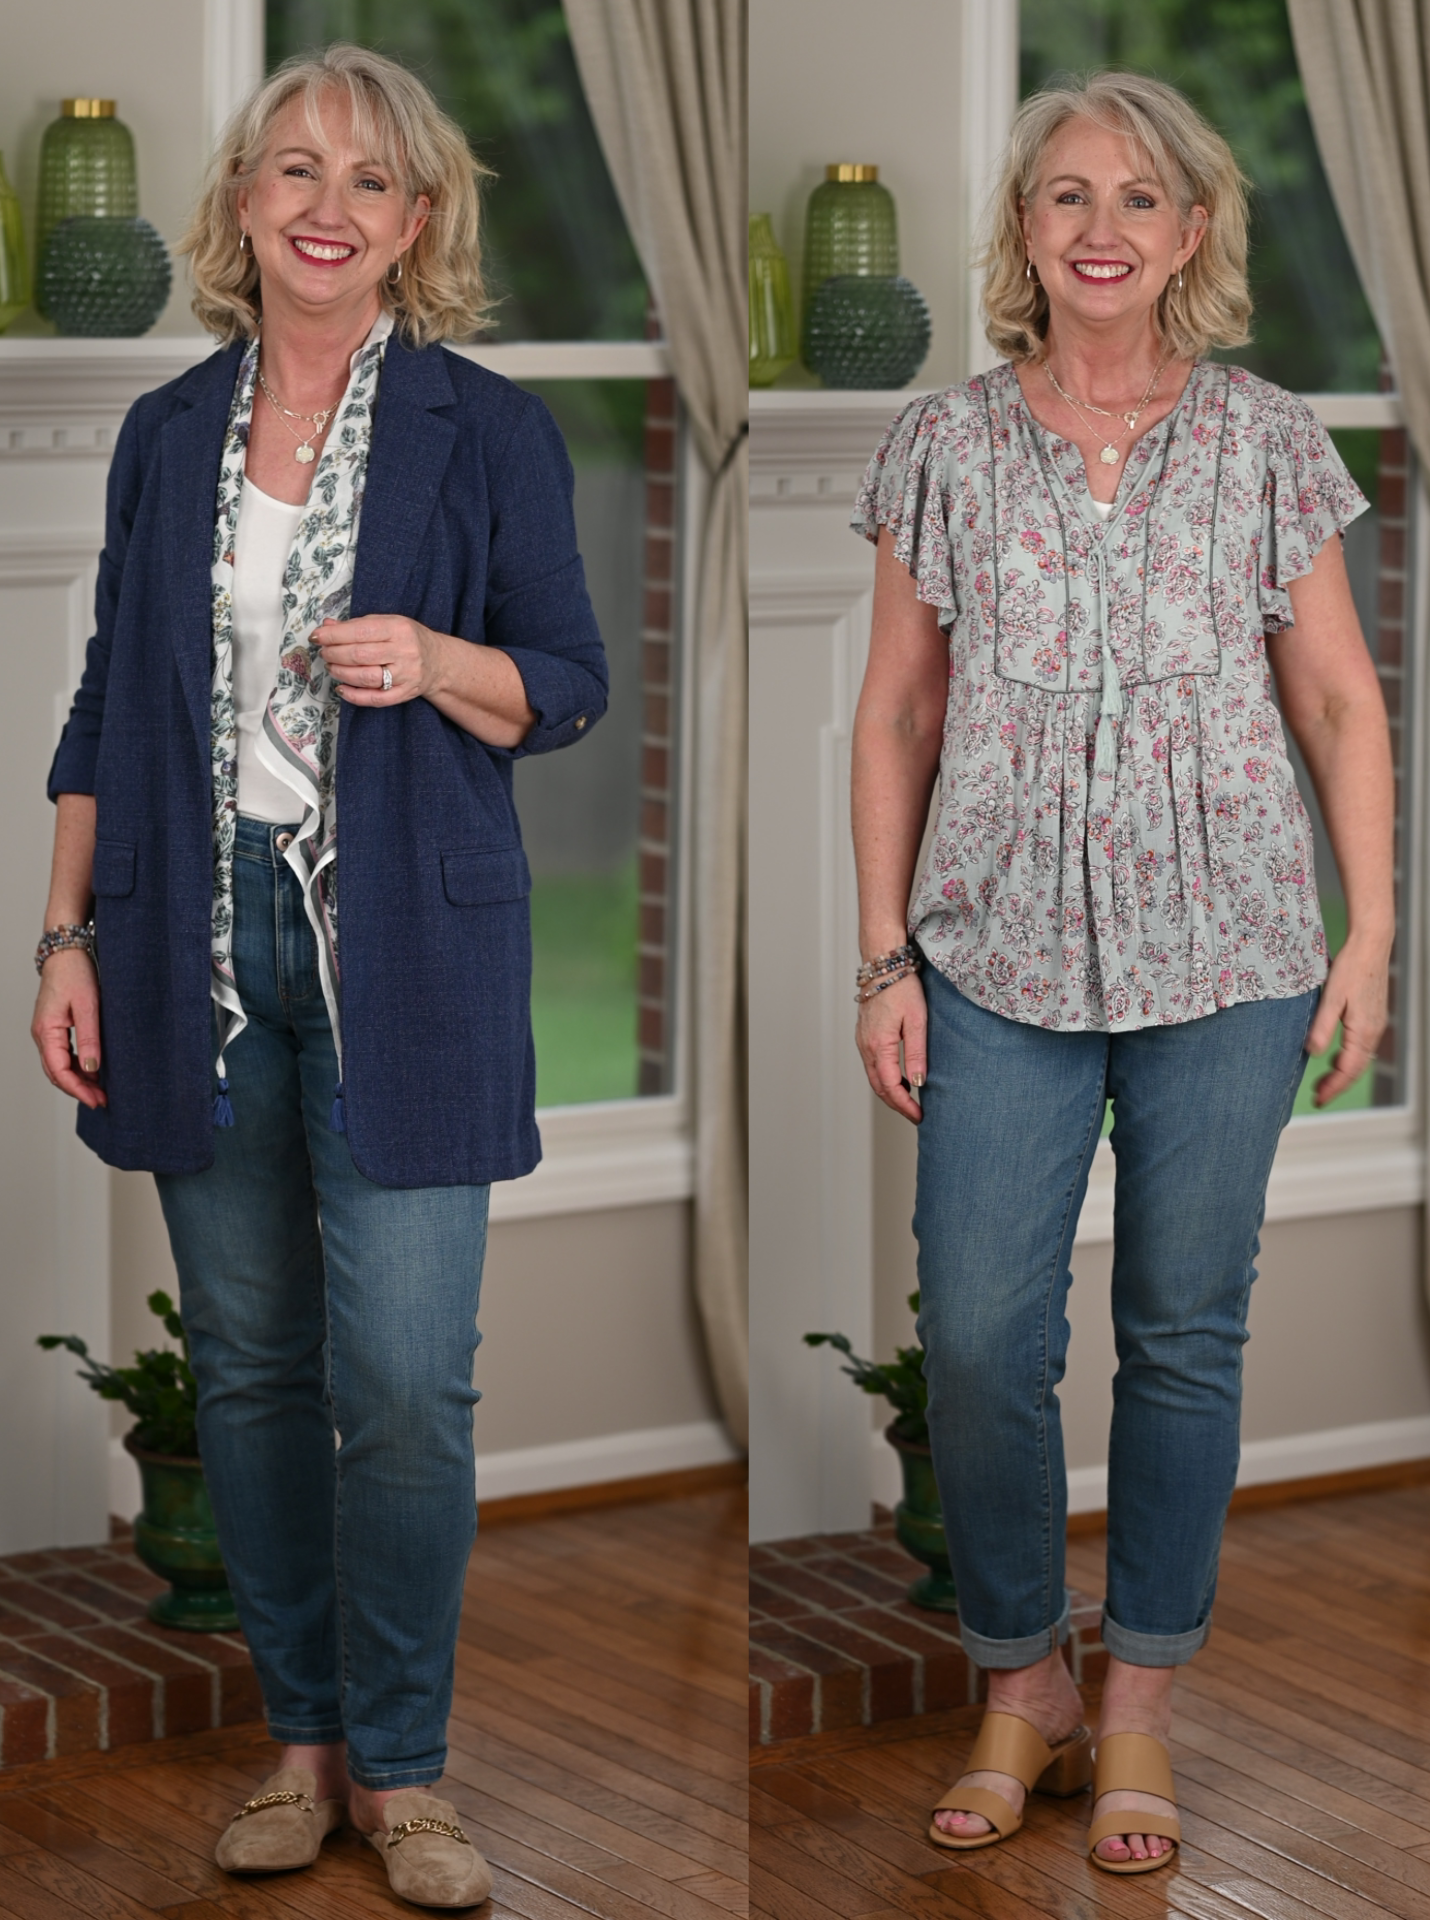 How to Look Great Wearing Jeans for Women Over 50